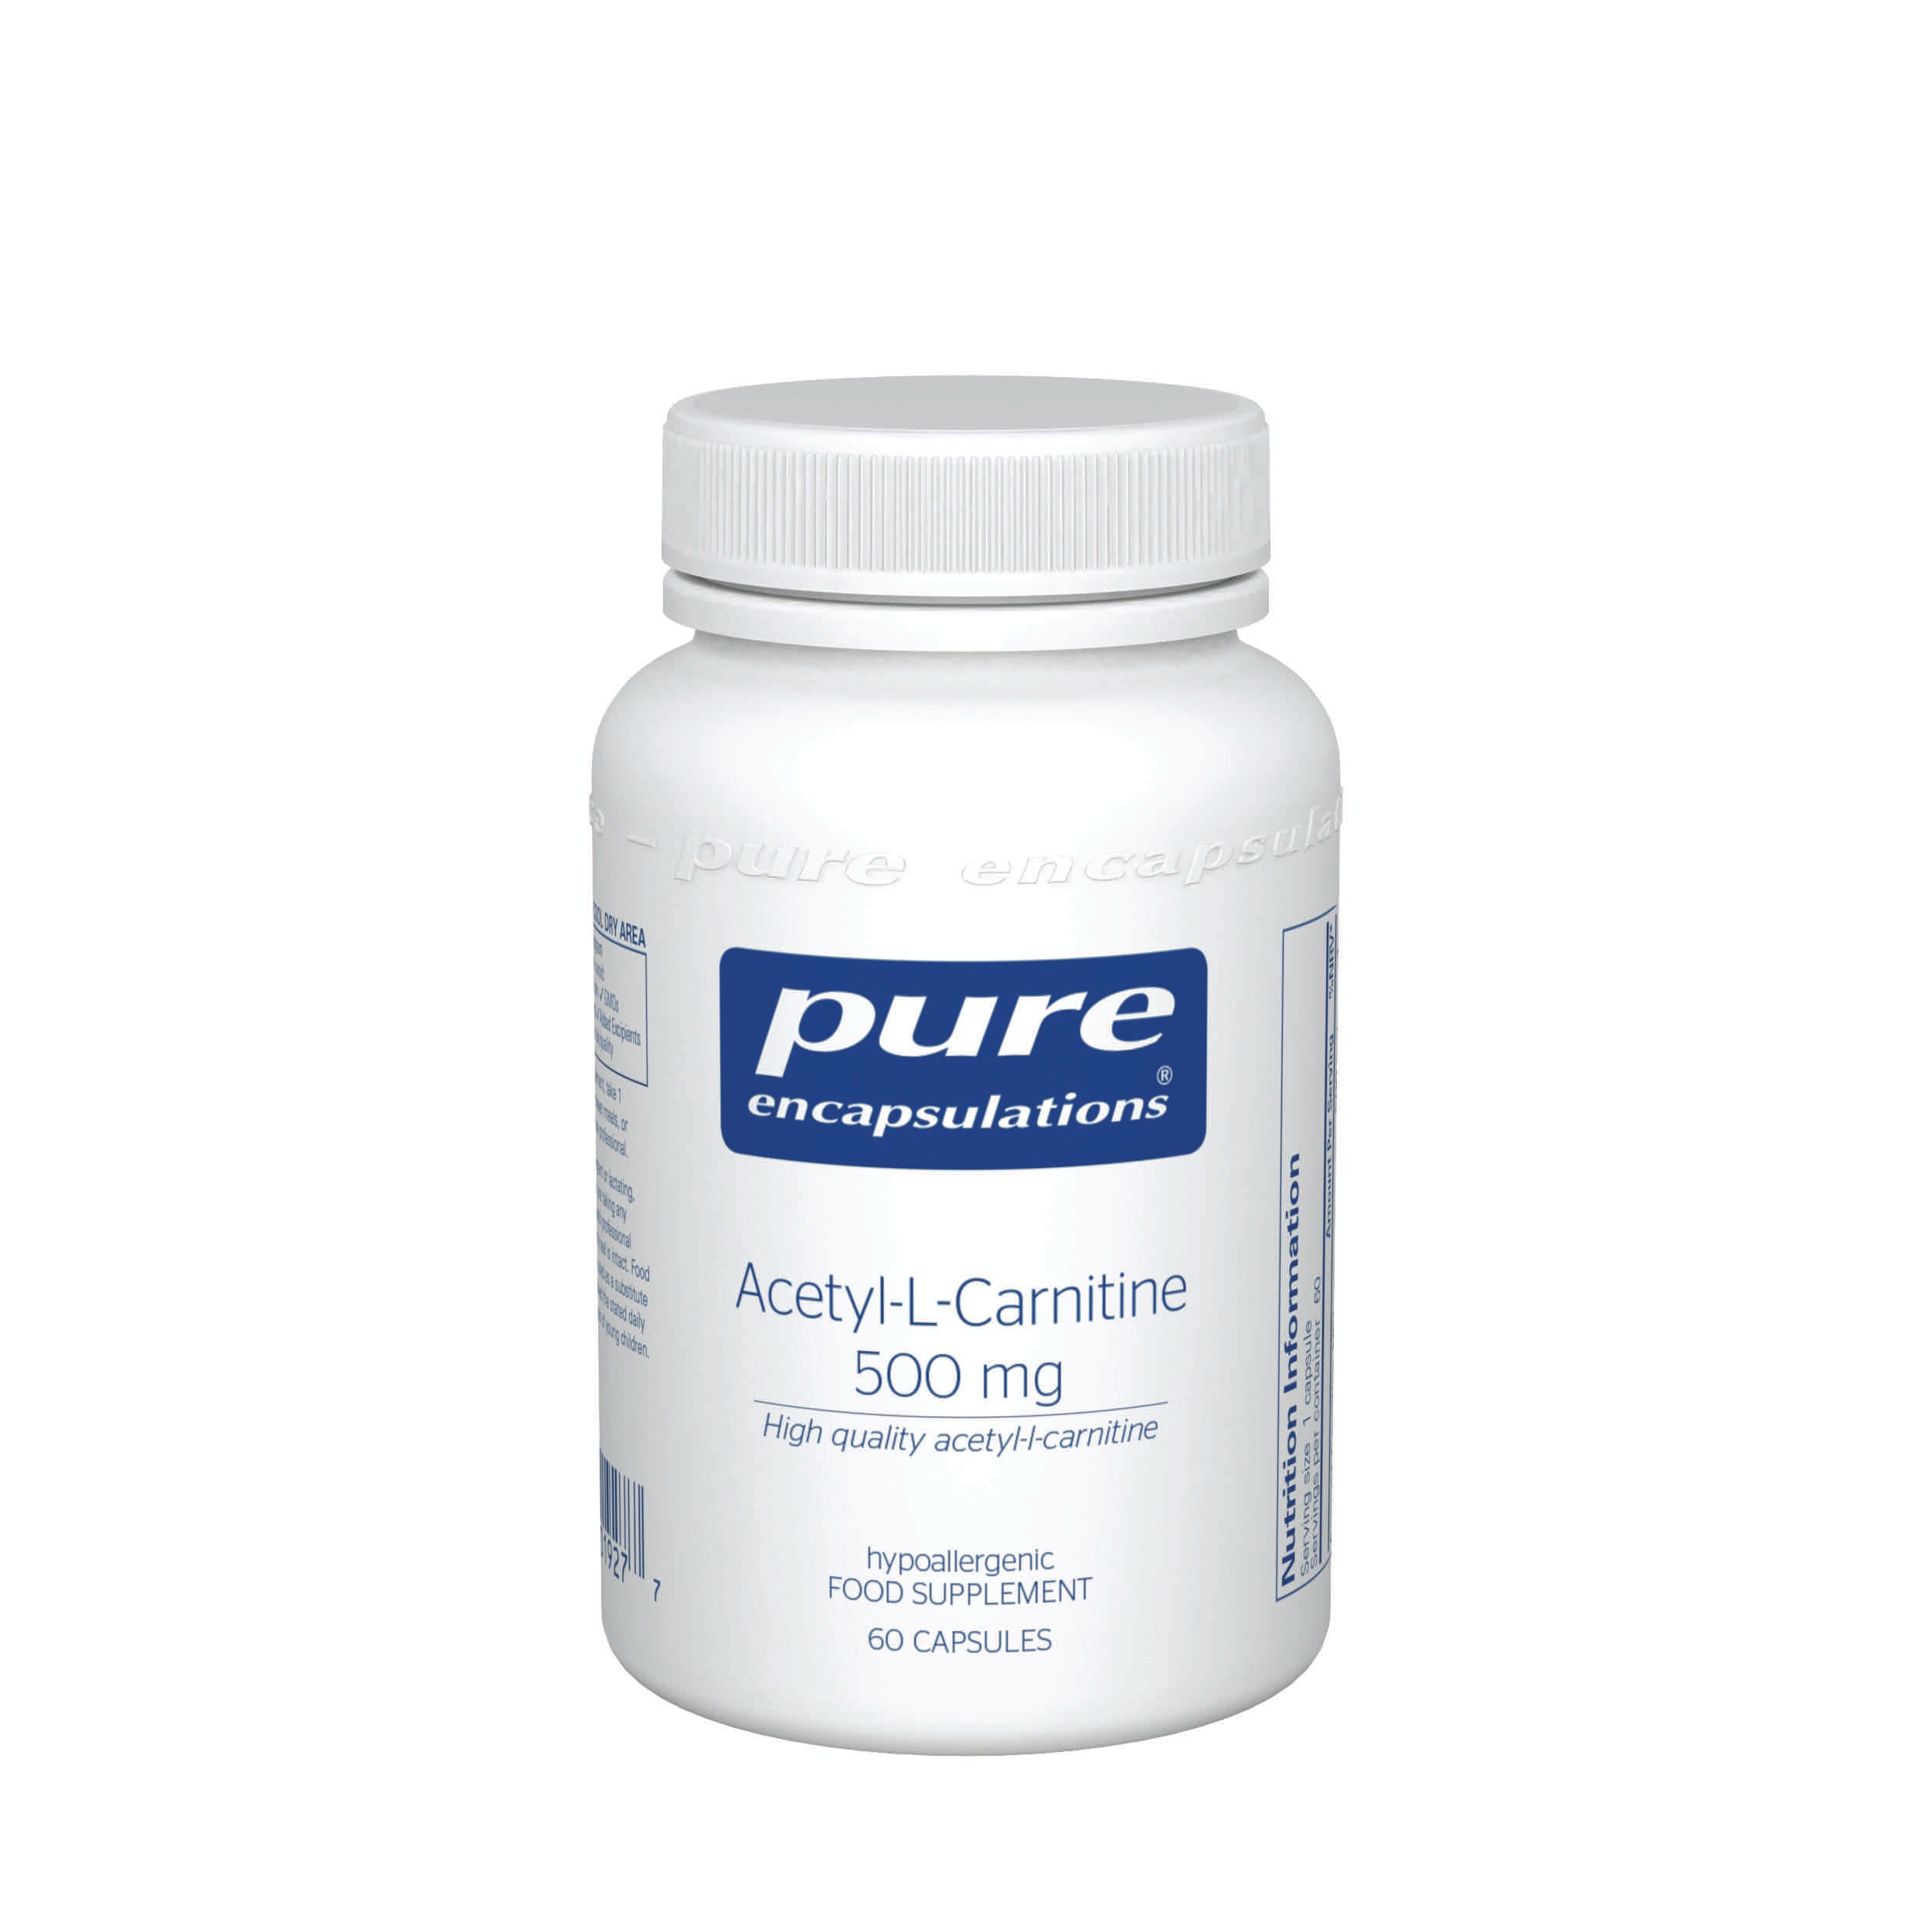 Pure Encapsulations Acetyl-L-Carnitine 500mg 60's